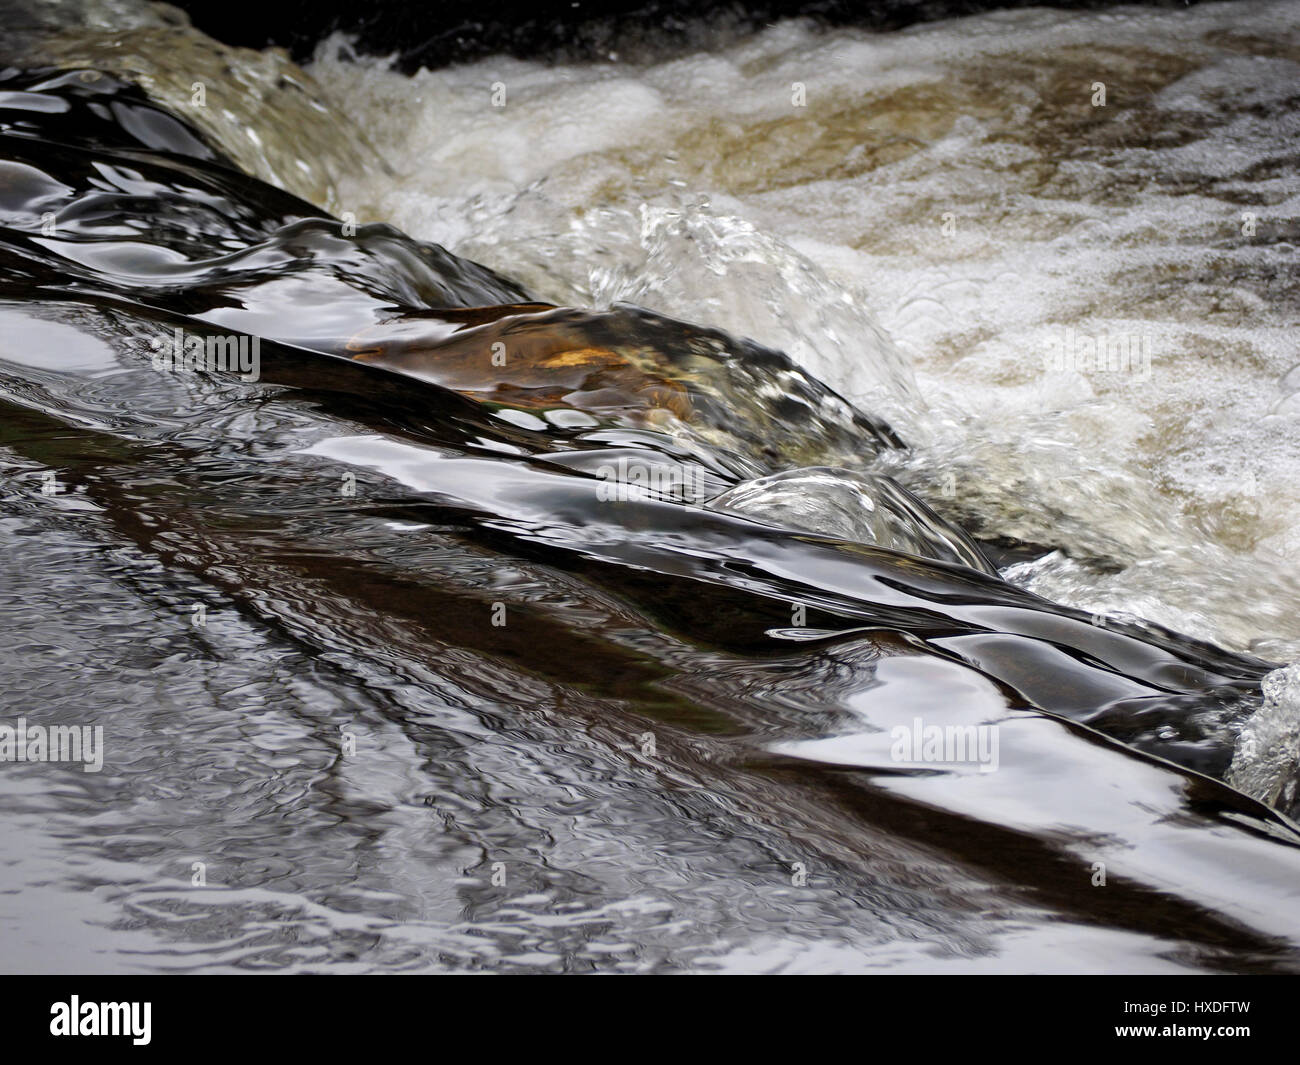 flowing water frozen in time at a waterfall giving contrast between smooth dark metallic liquid before it crashes into a foaming cascade of bubbles Stock Photo